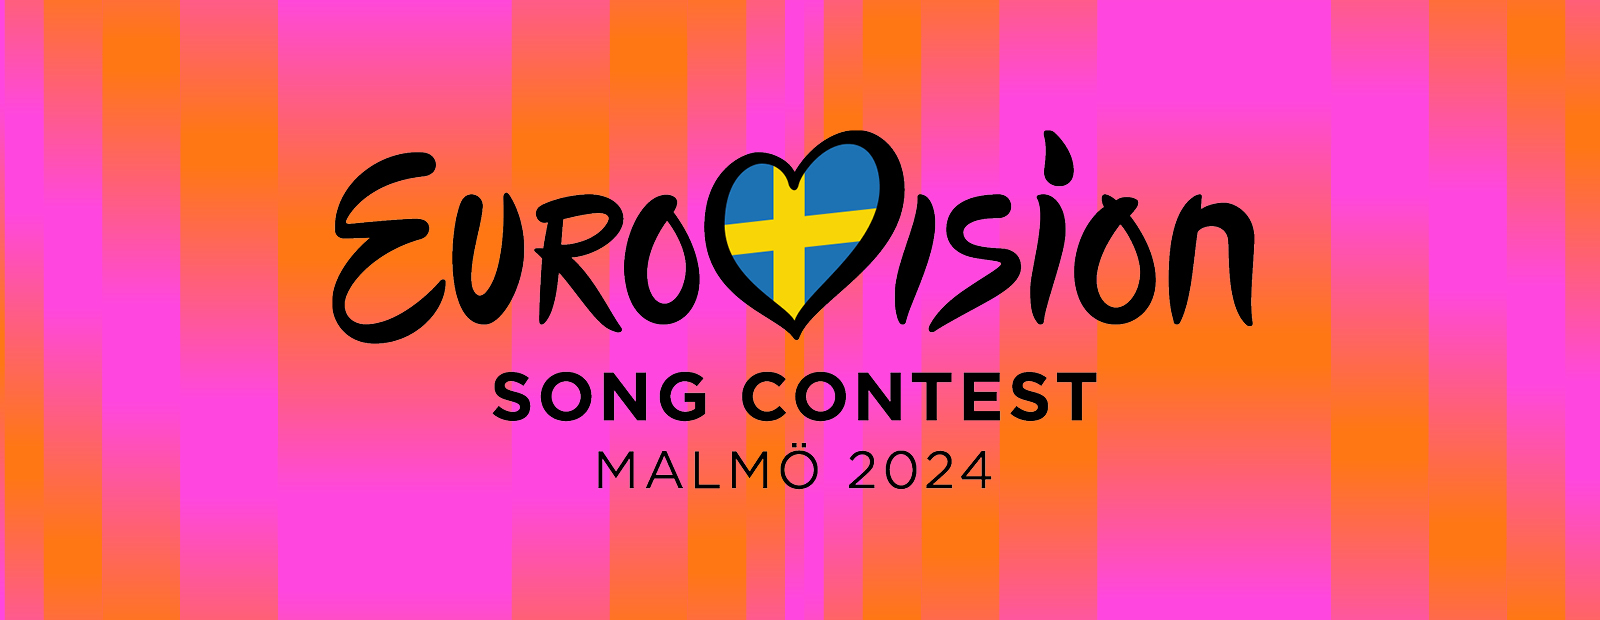 Eurovision Song Contest 2024 Semifinal 1 - Afternoon Preview